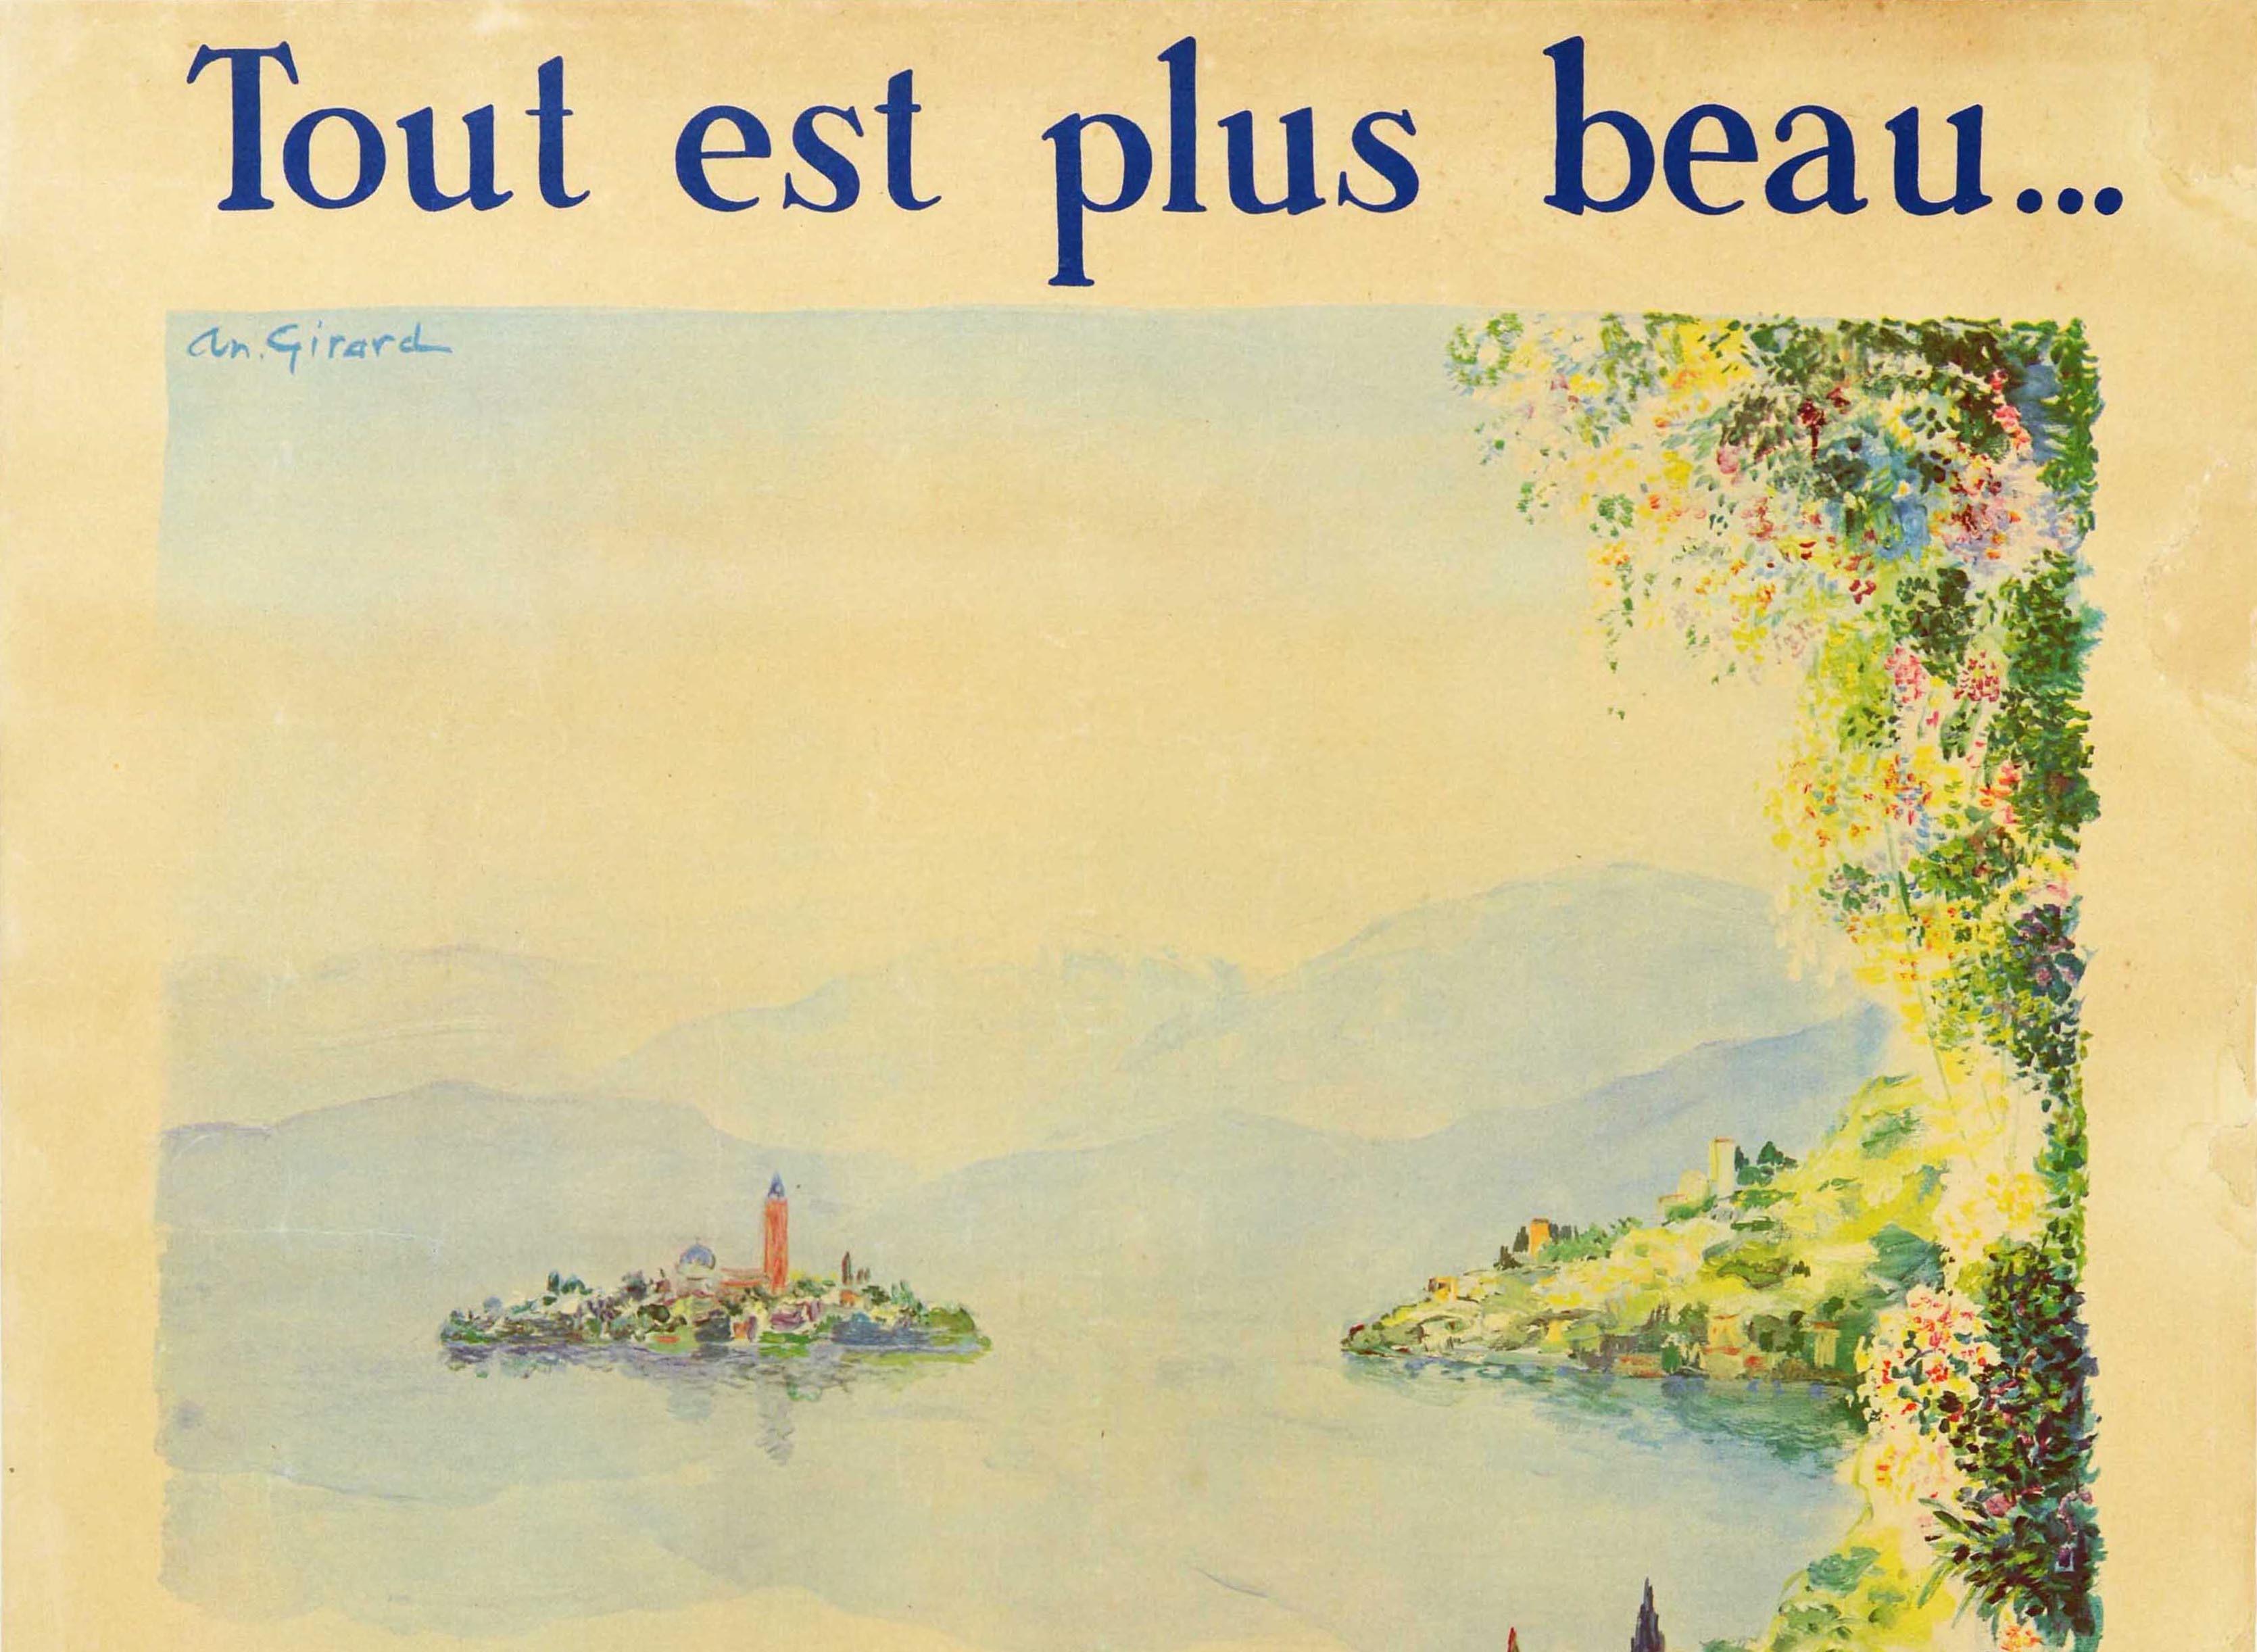 Original vintage car advertising poster - Tout est plus beau ... avec une Peugeot / Everything is more beautiful ... with a Peugeot - featuring a brand new red Peugeot 402 with the number plate 302 402 driving towards the viewer on a hillside road